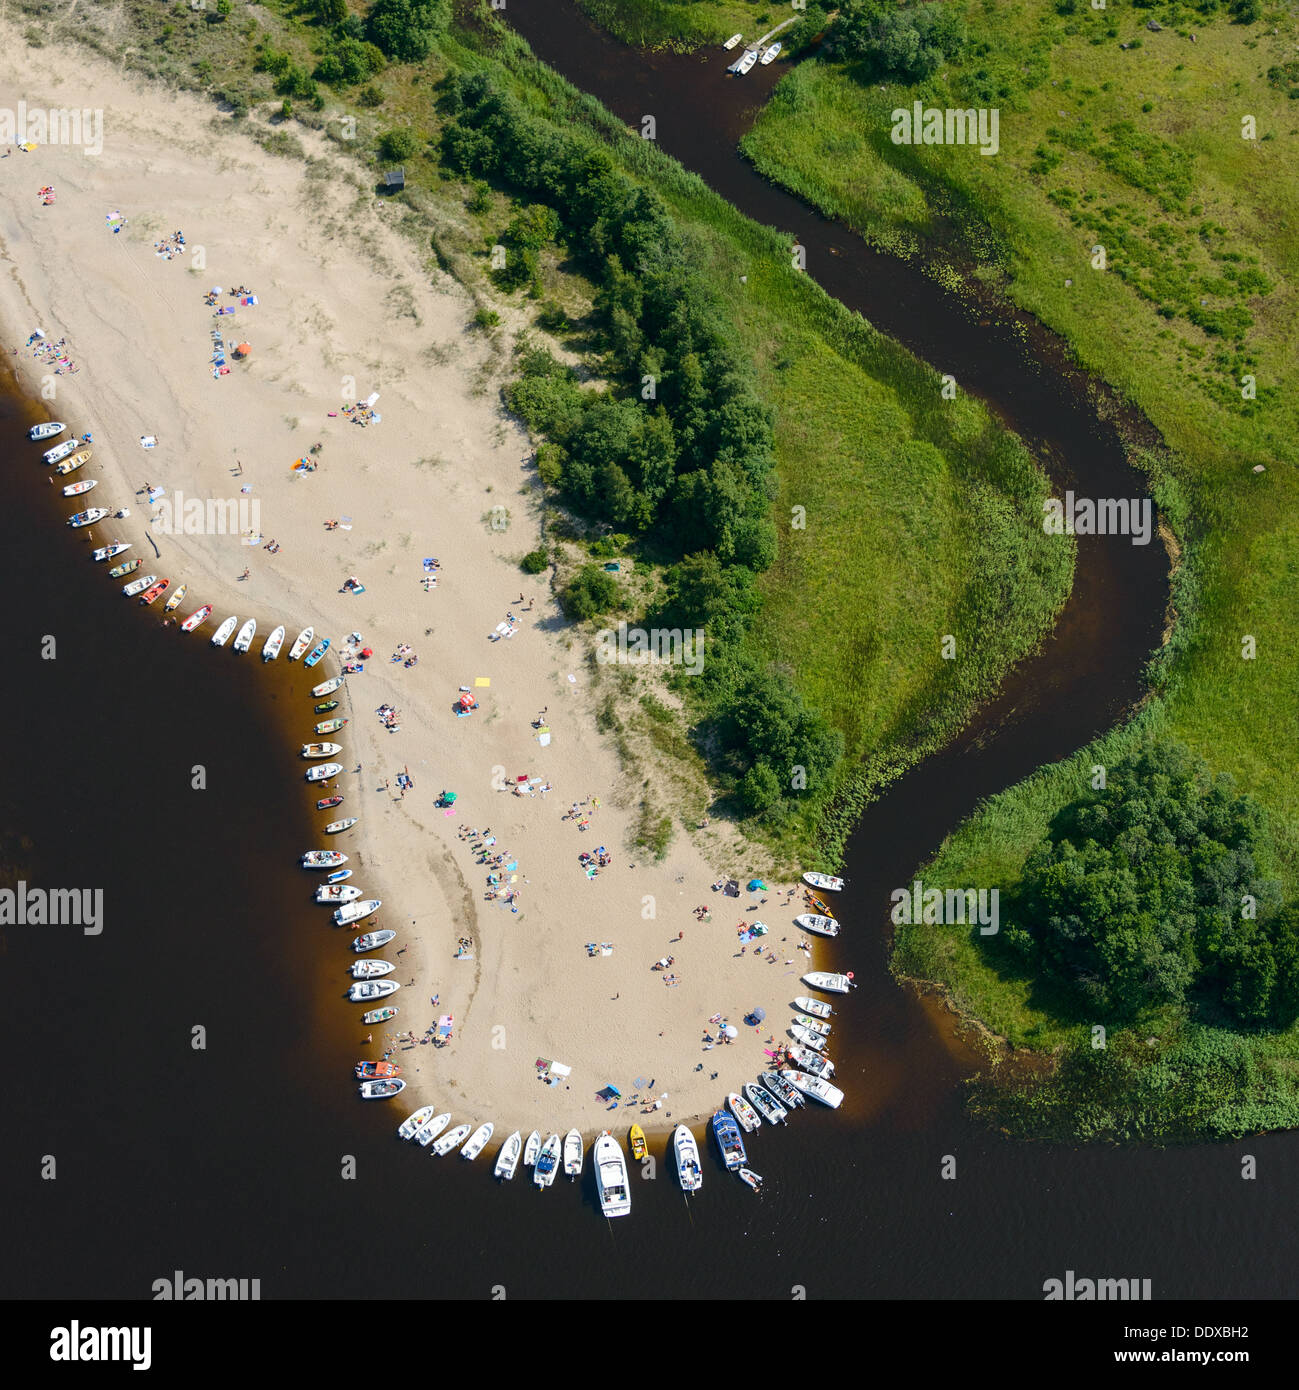 Aerial view of beach with boats, Rullsand, Uppland, Sweden Stock Photo